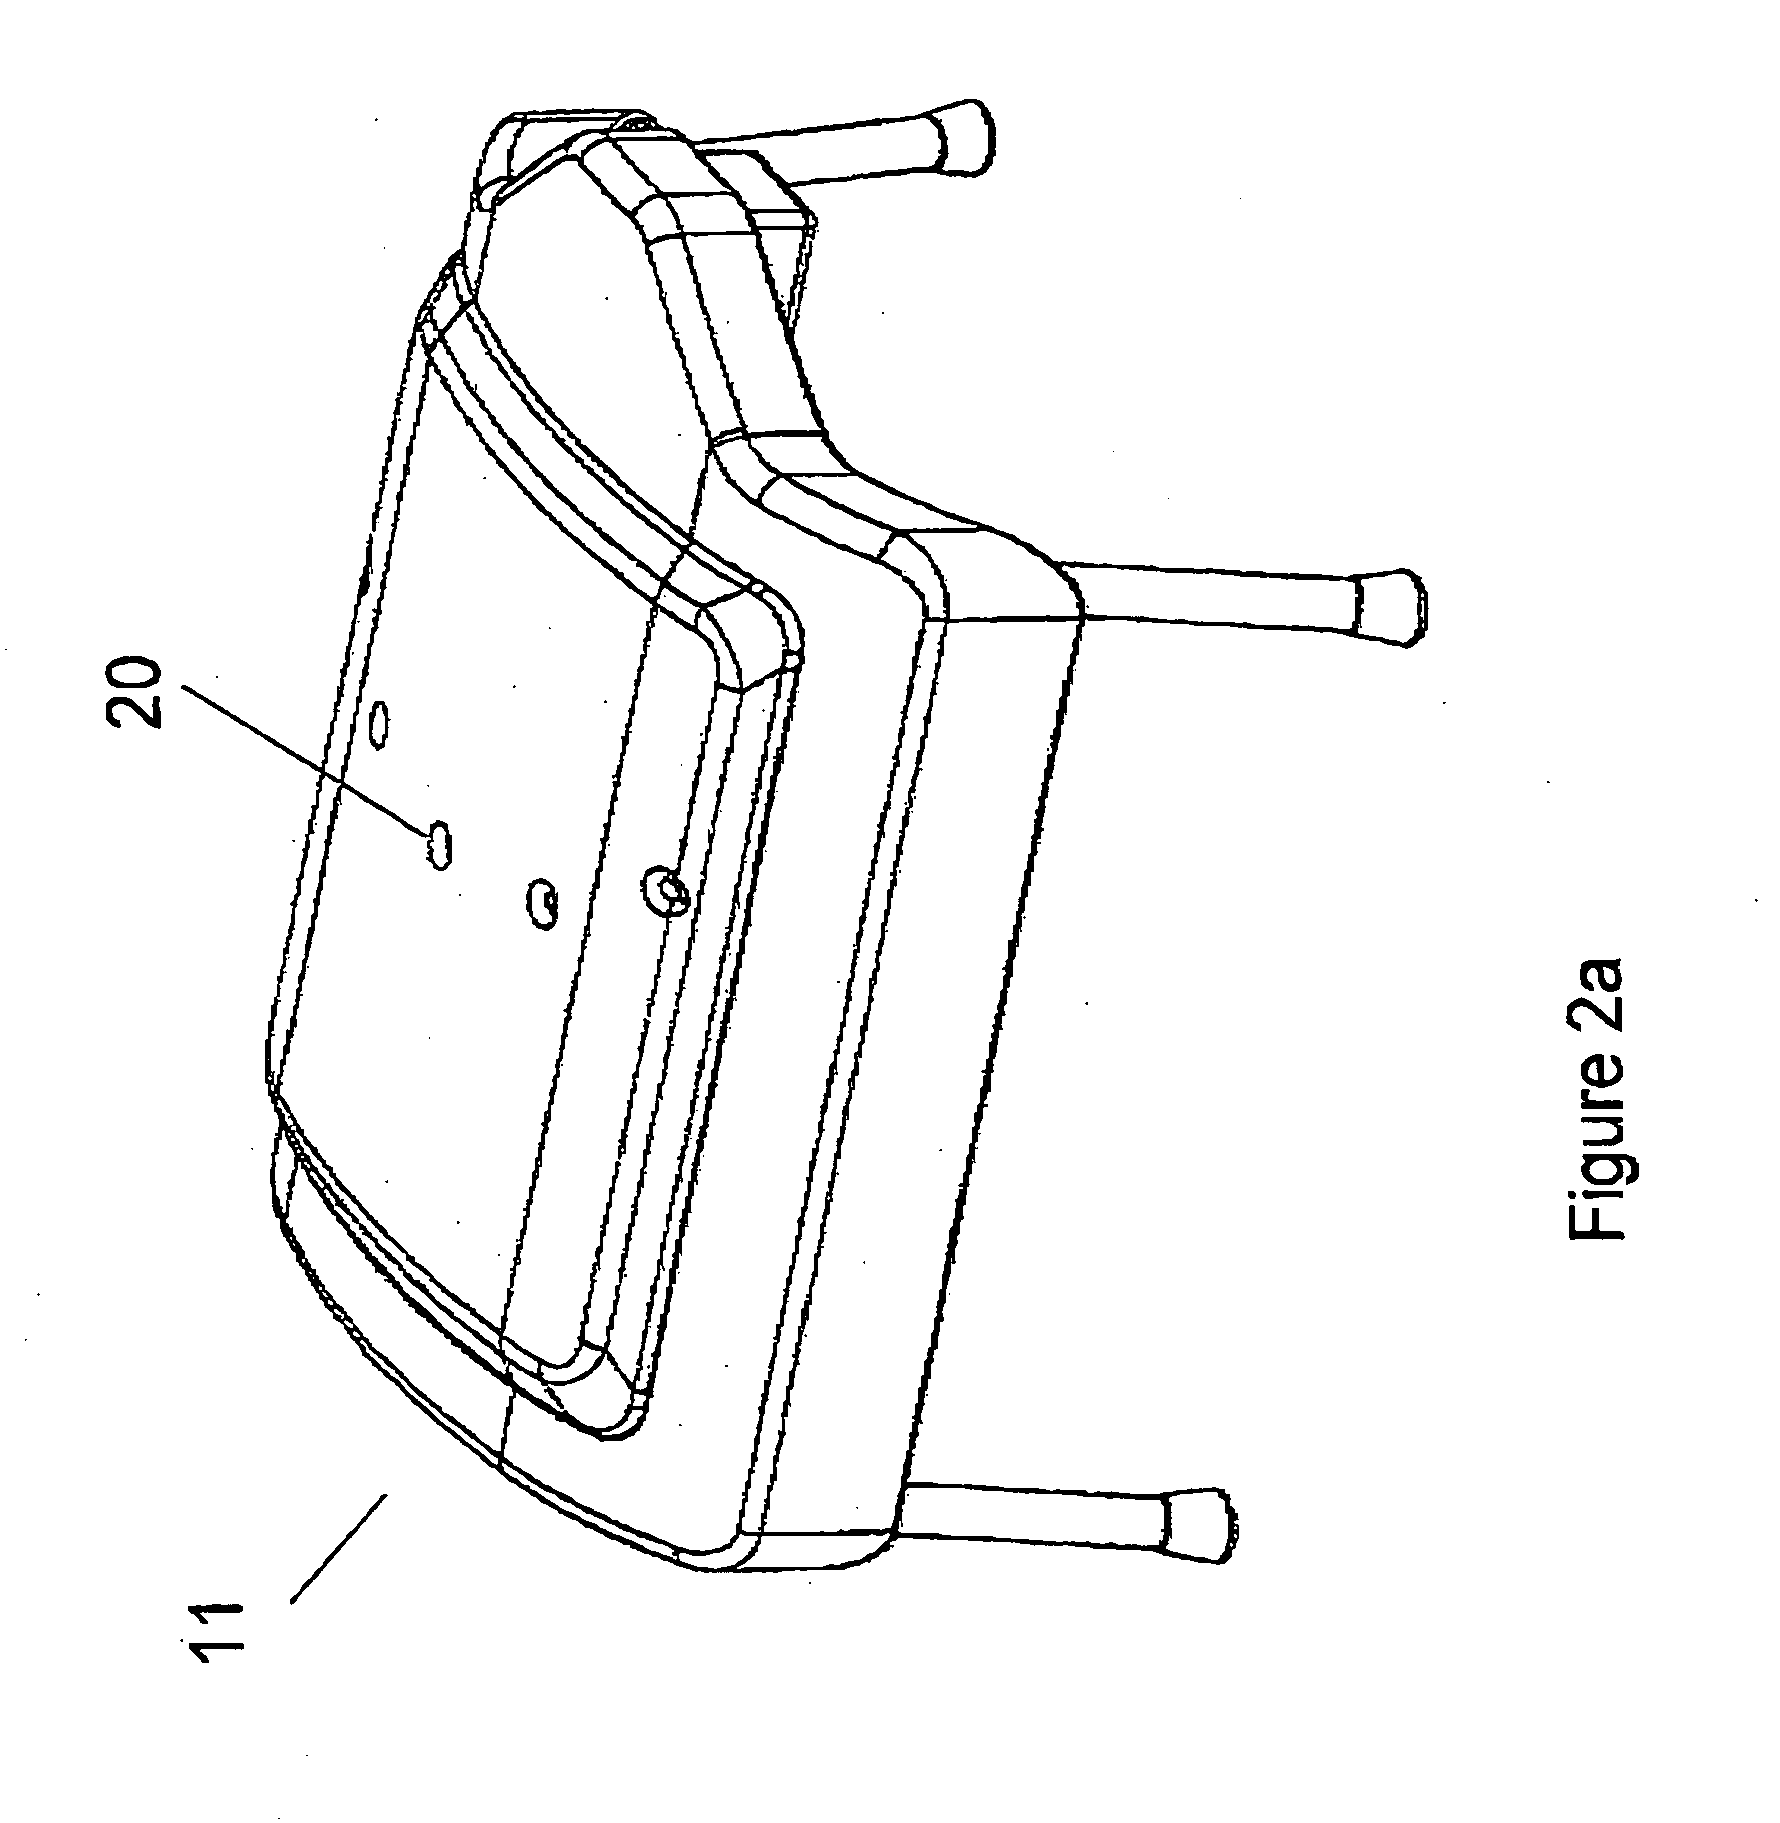 Kit, operating element and haptic device for use in surgical simulation systems